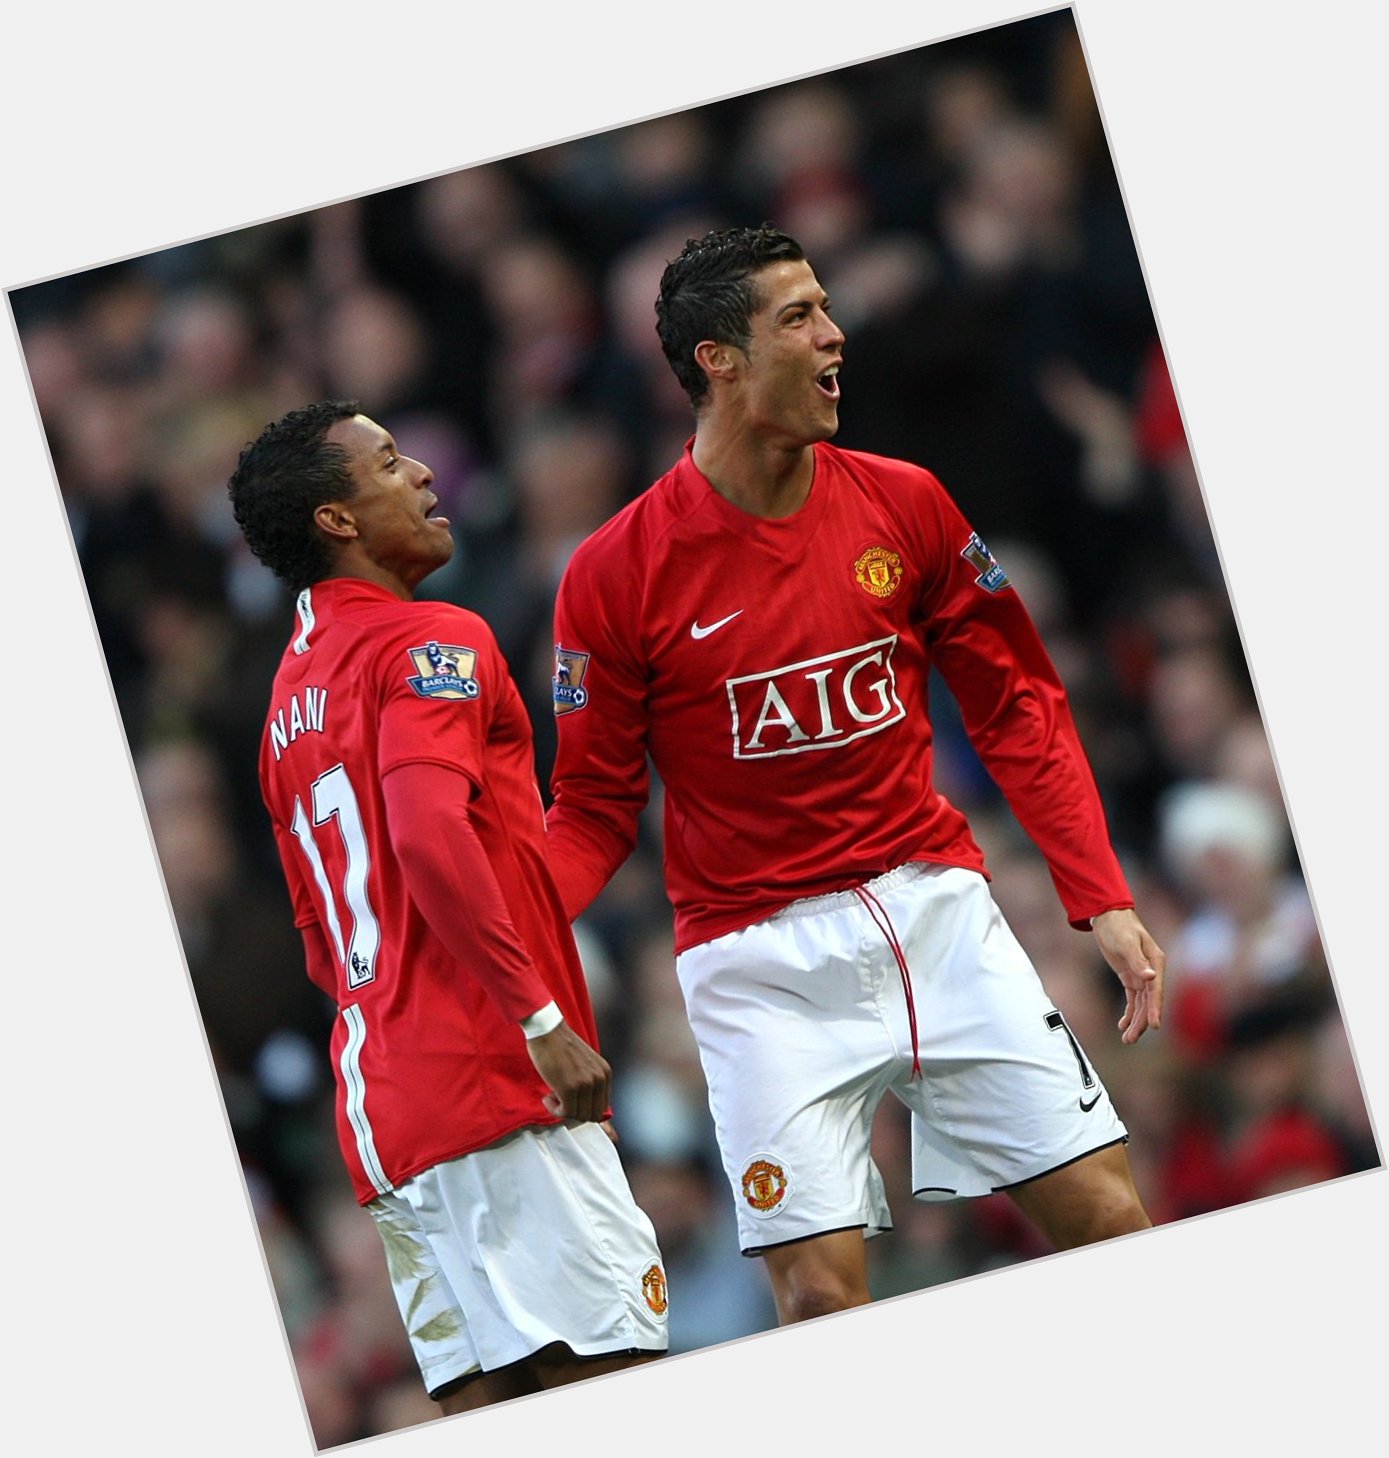 One of the best Portuguese players of his generation.

Happy birthday to Luis Nani.   